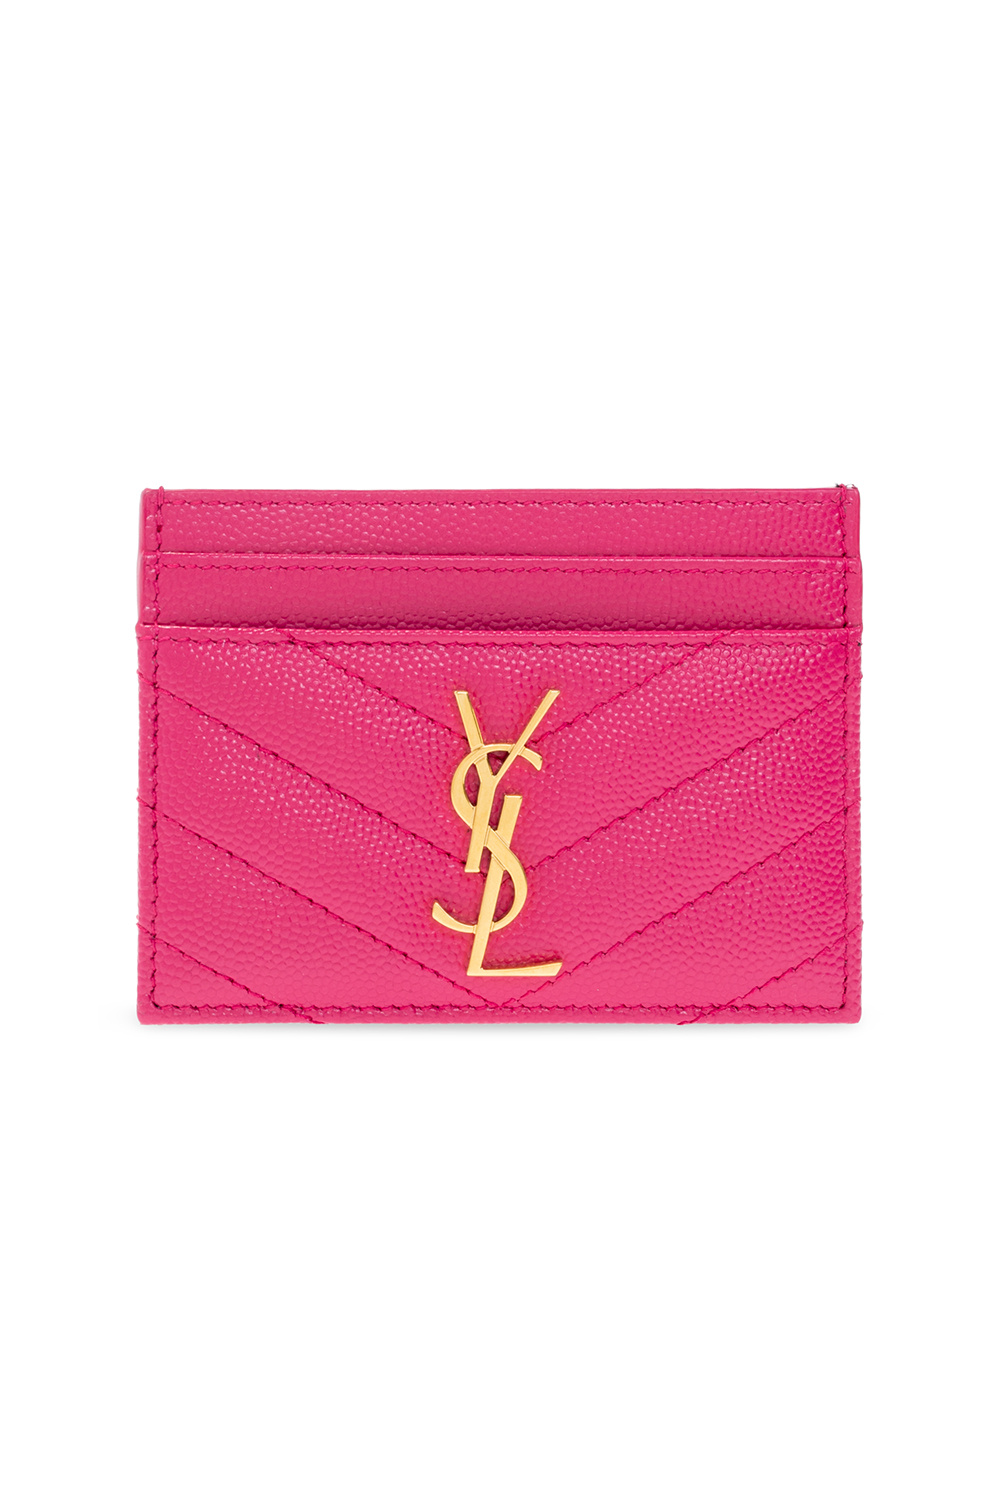 Saint Laurent Ysl Credit Card Holder In Fuxia Cout